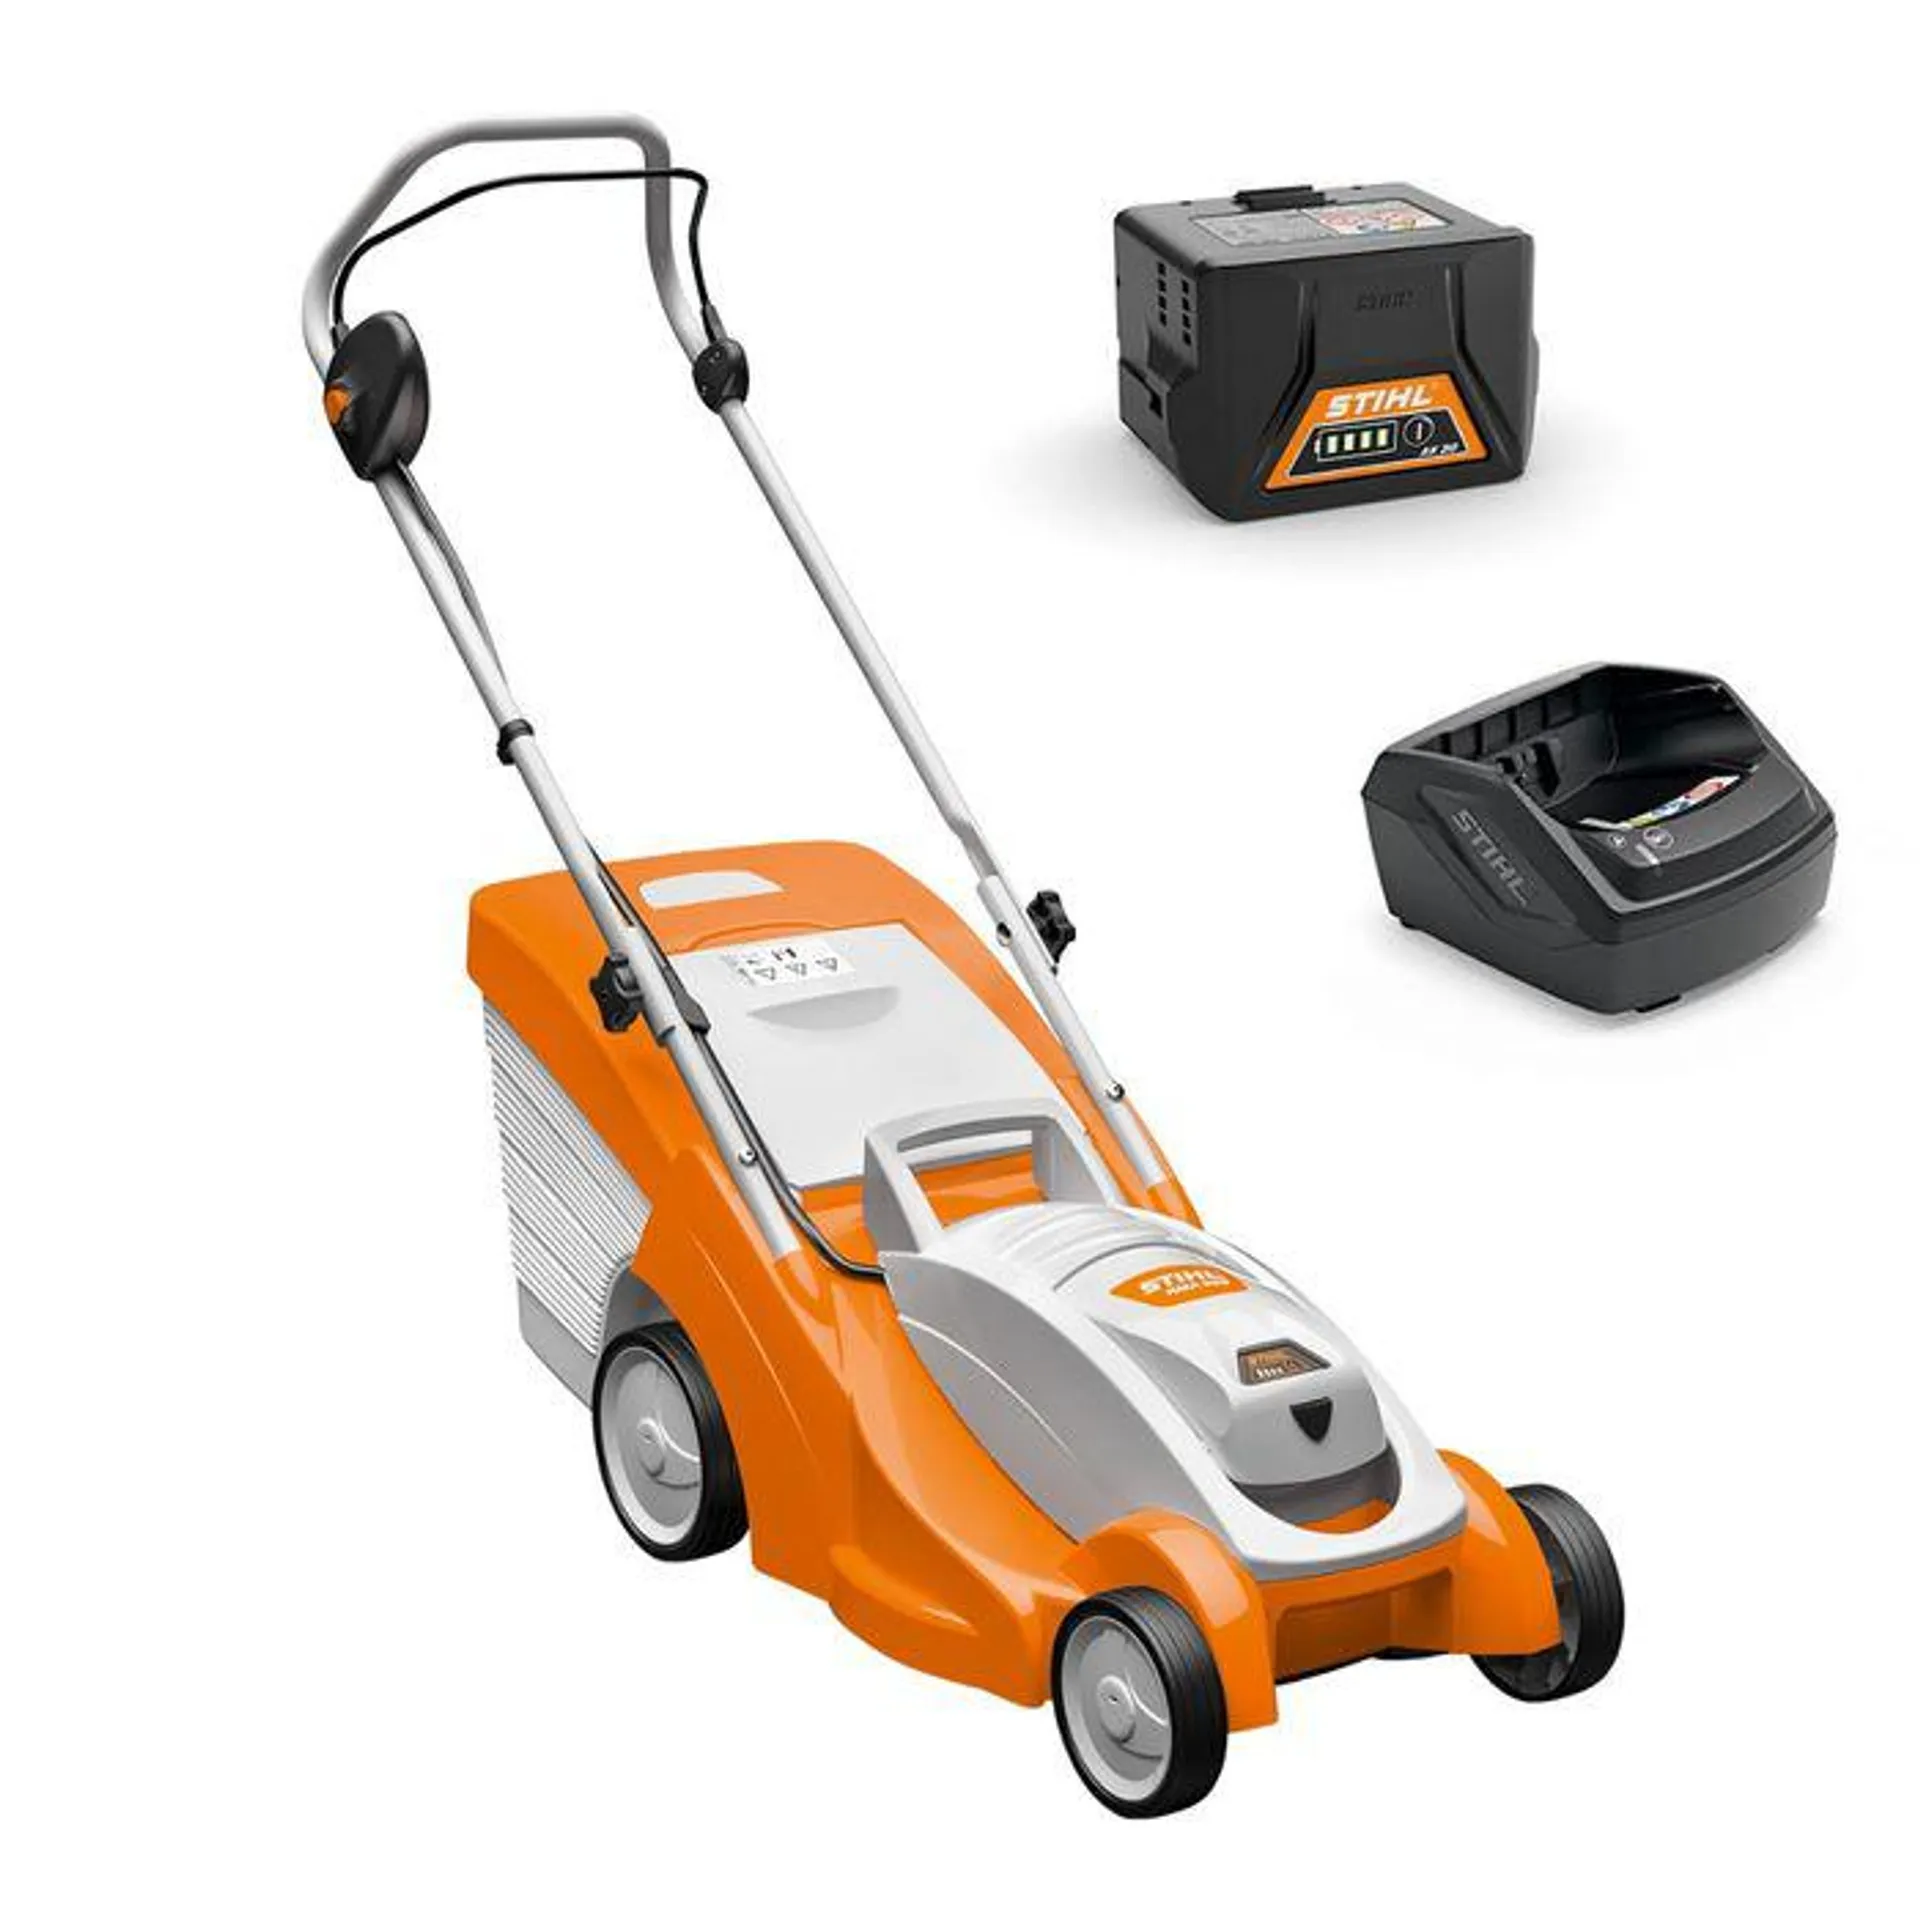 STIHL RMA 339 AK Battery Lawnmower Kit (With Battery & Charger)